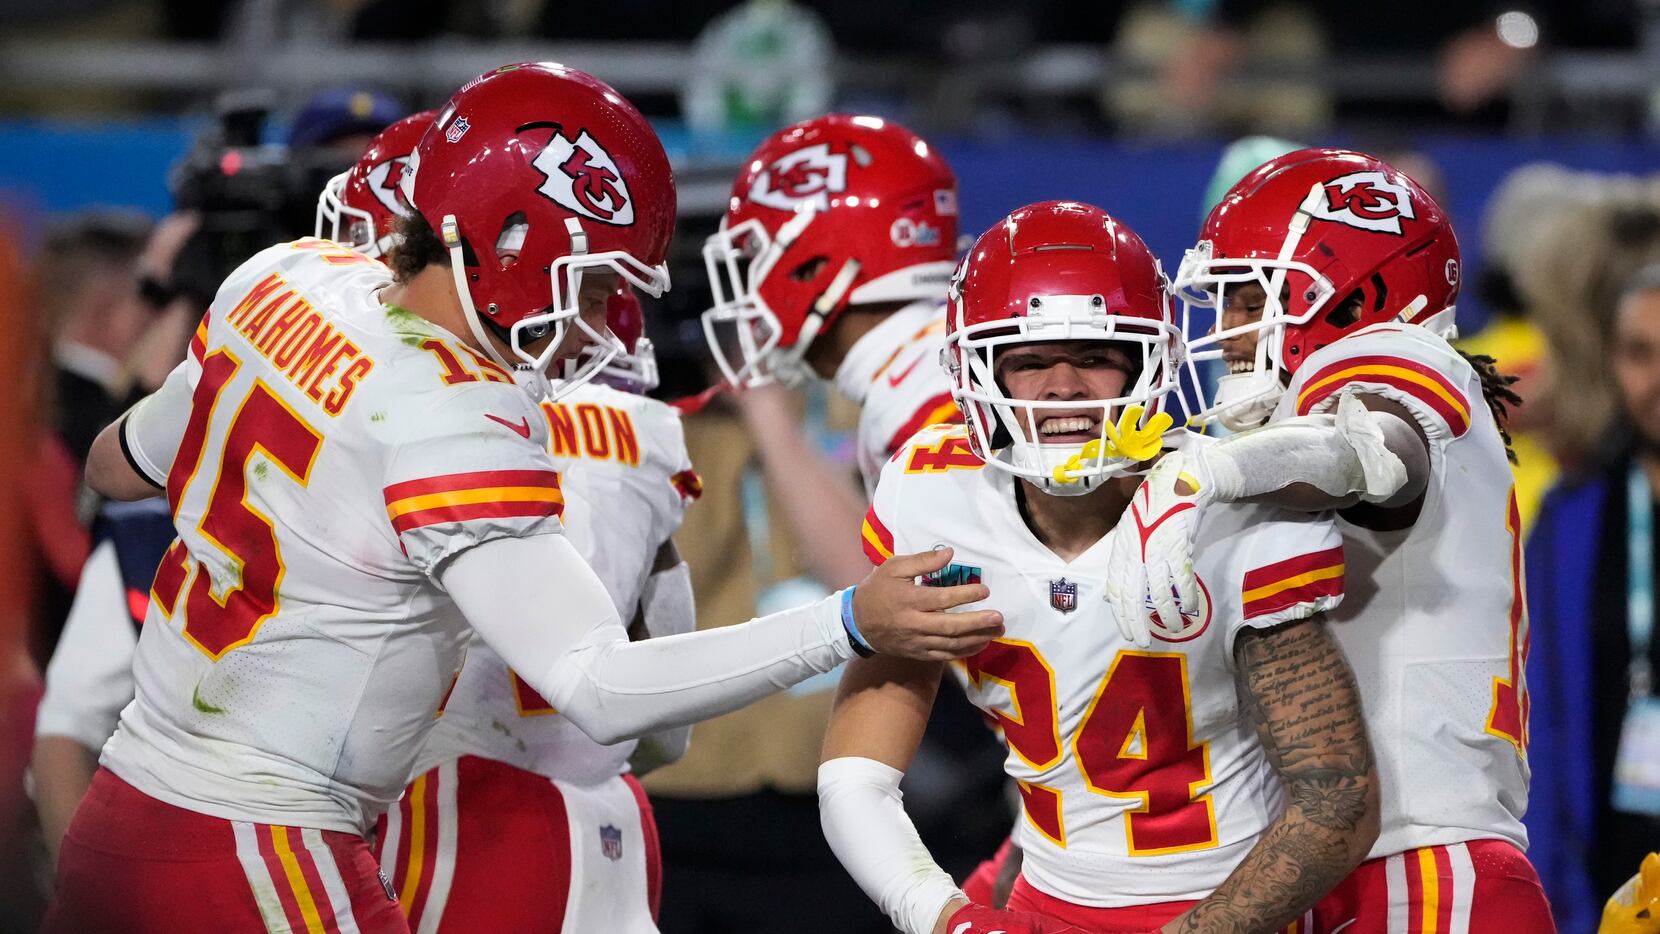 Ridiculous end' to a 'great game': National reaction to Chiefs